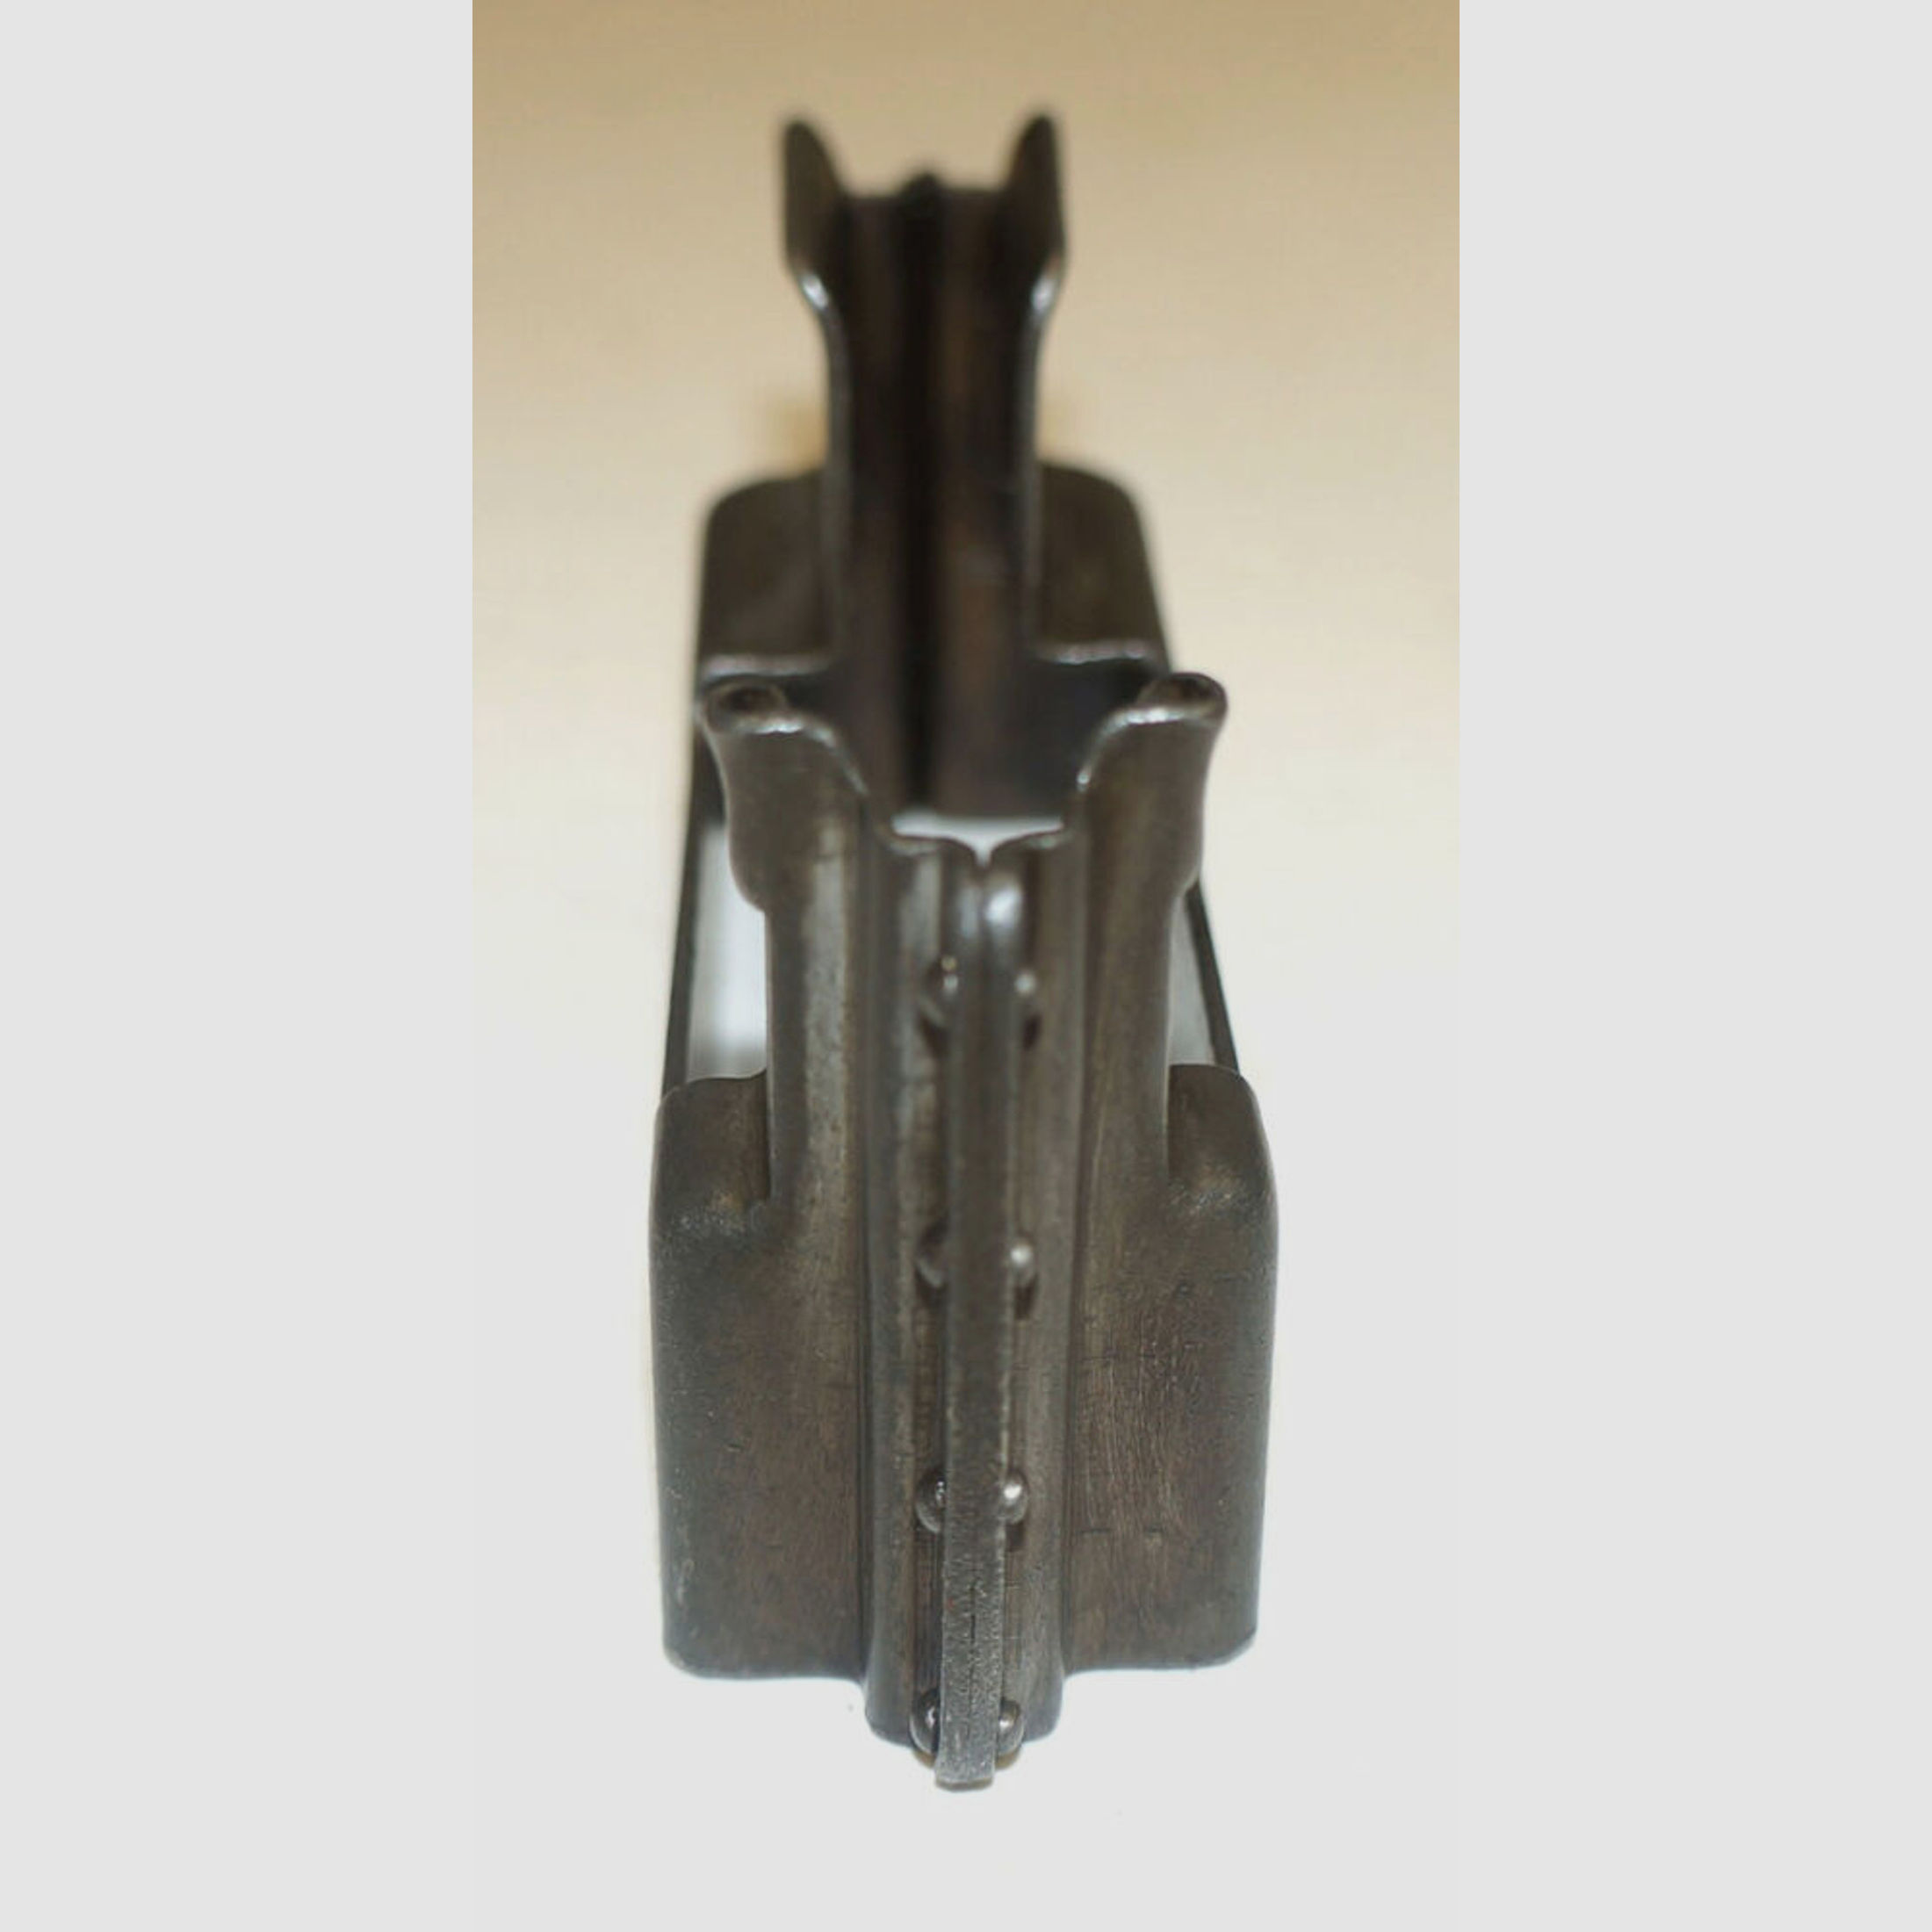 Browning	 Magazinlader BAR (Browning Automatic Rifle,MG,Maschinen.) M1918, M1918A1, M1918A2 Kal. .30-06Spring.